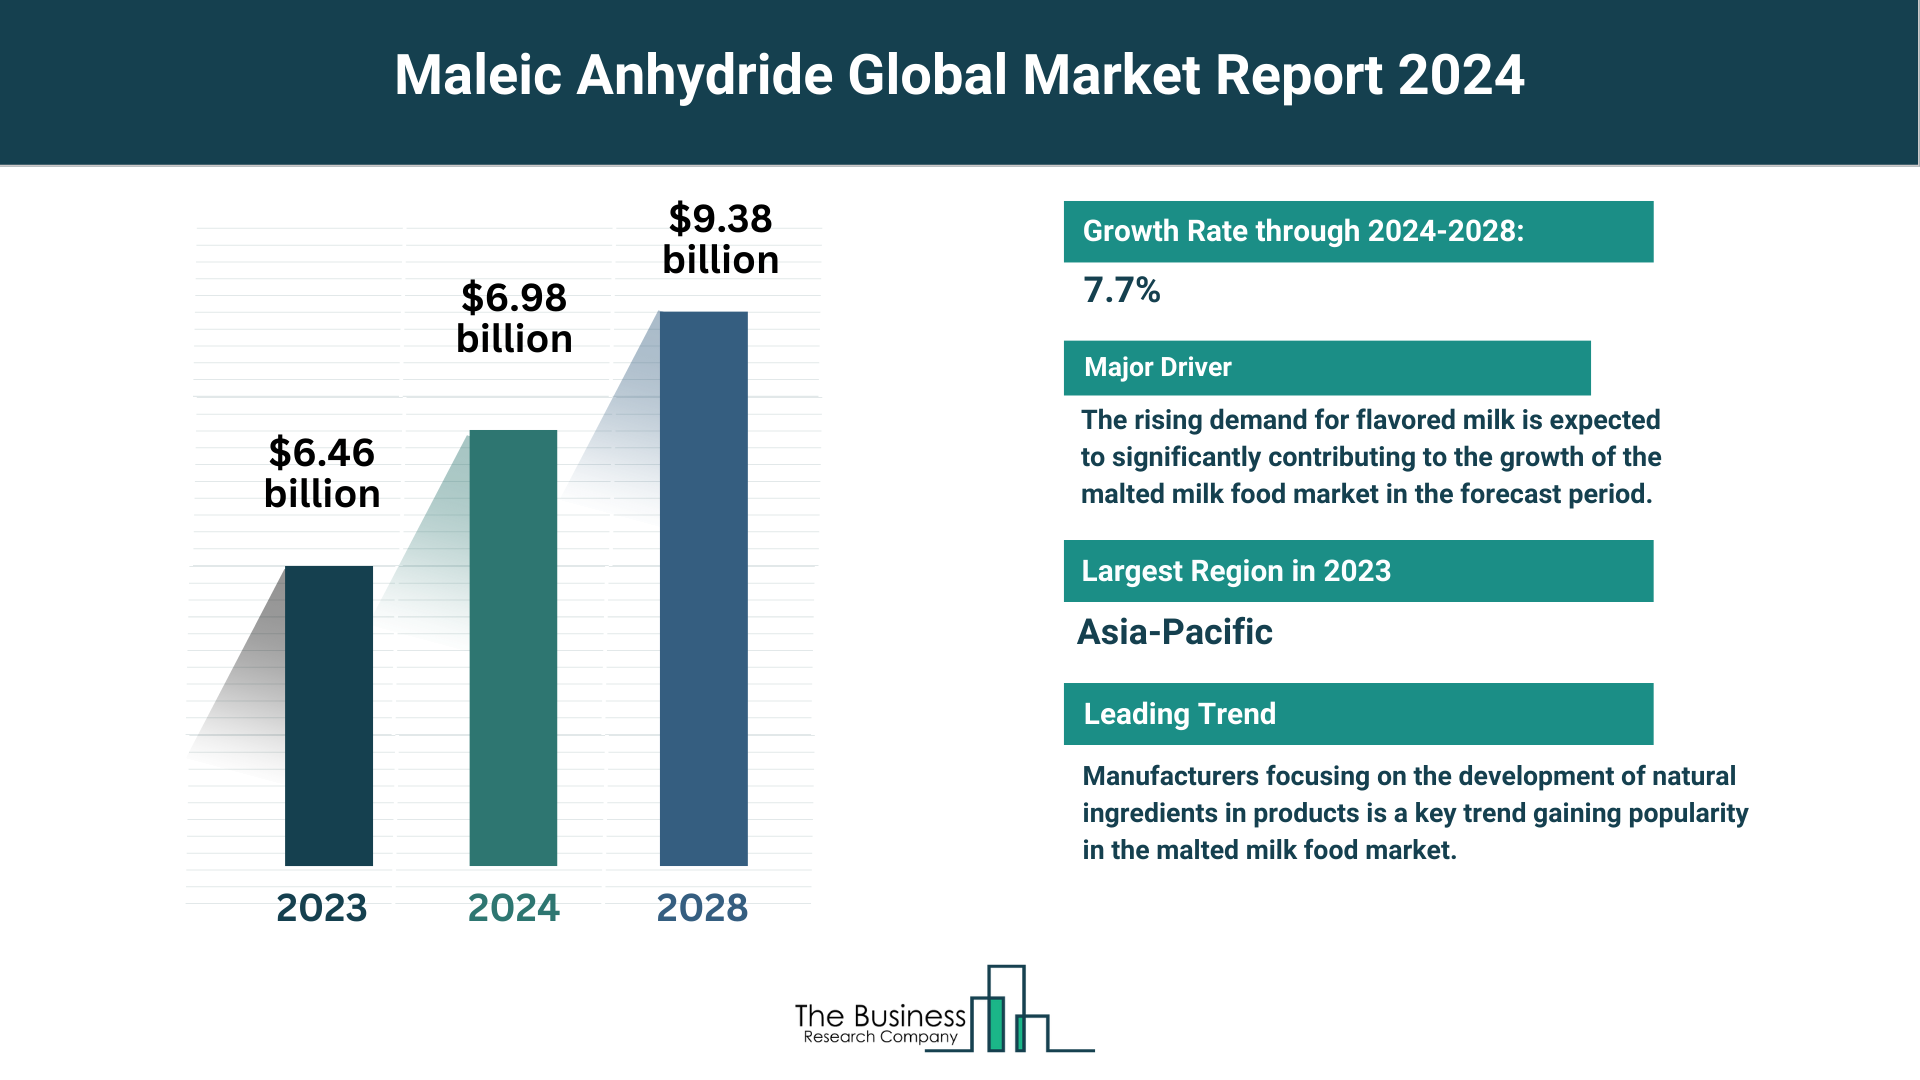 Global Maleic Anhydride Market Analysis: Size, Drivers, Trends, Opportunities And Strategies